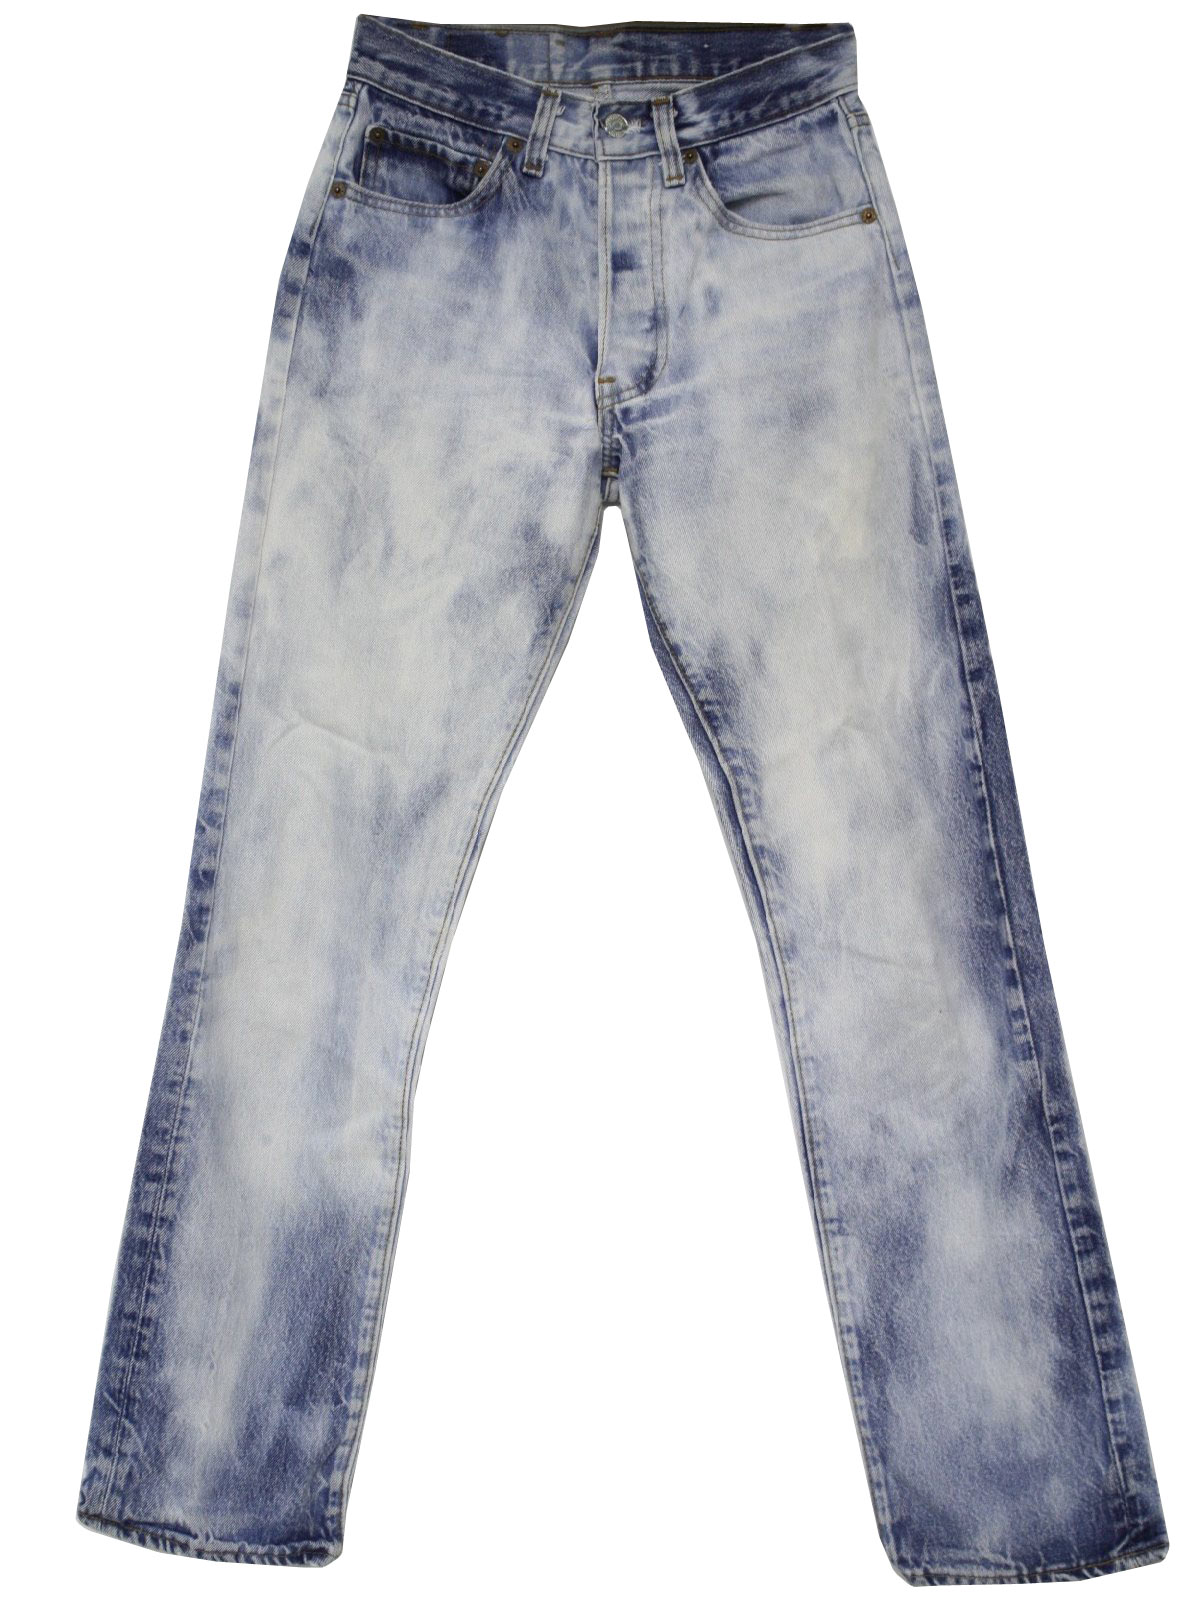 1980's Pants (Levis): 80s -Levis- blue and white bleached cotton denim jeans with five pocket cut, button fly and slightly tapered legs.